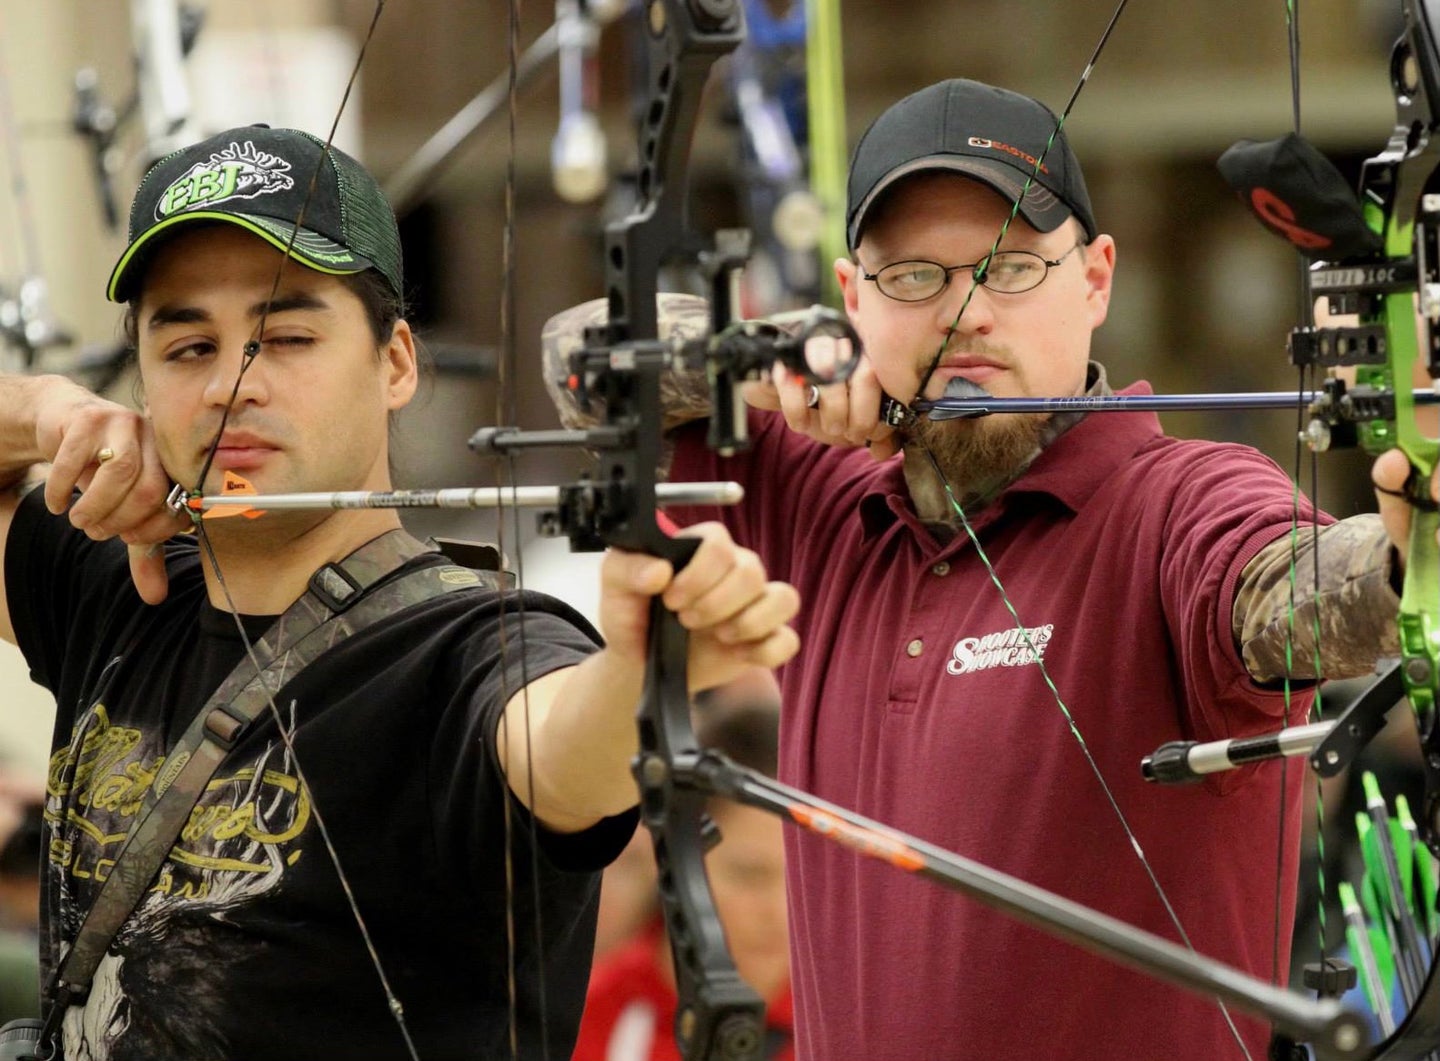 Two archers side-by-side shooting in an indoor archery league.